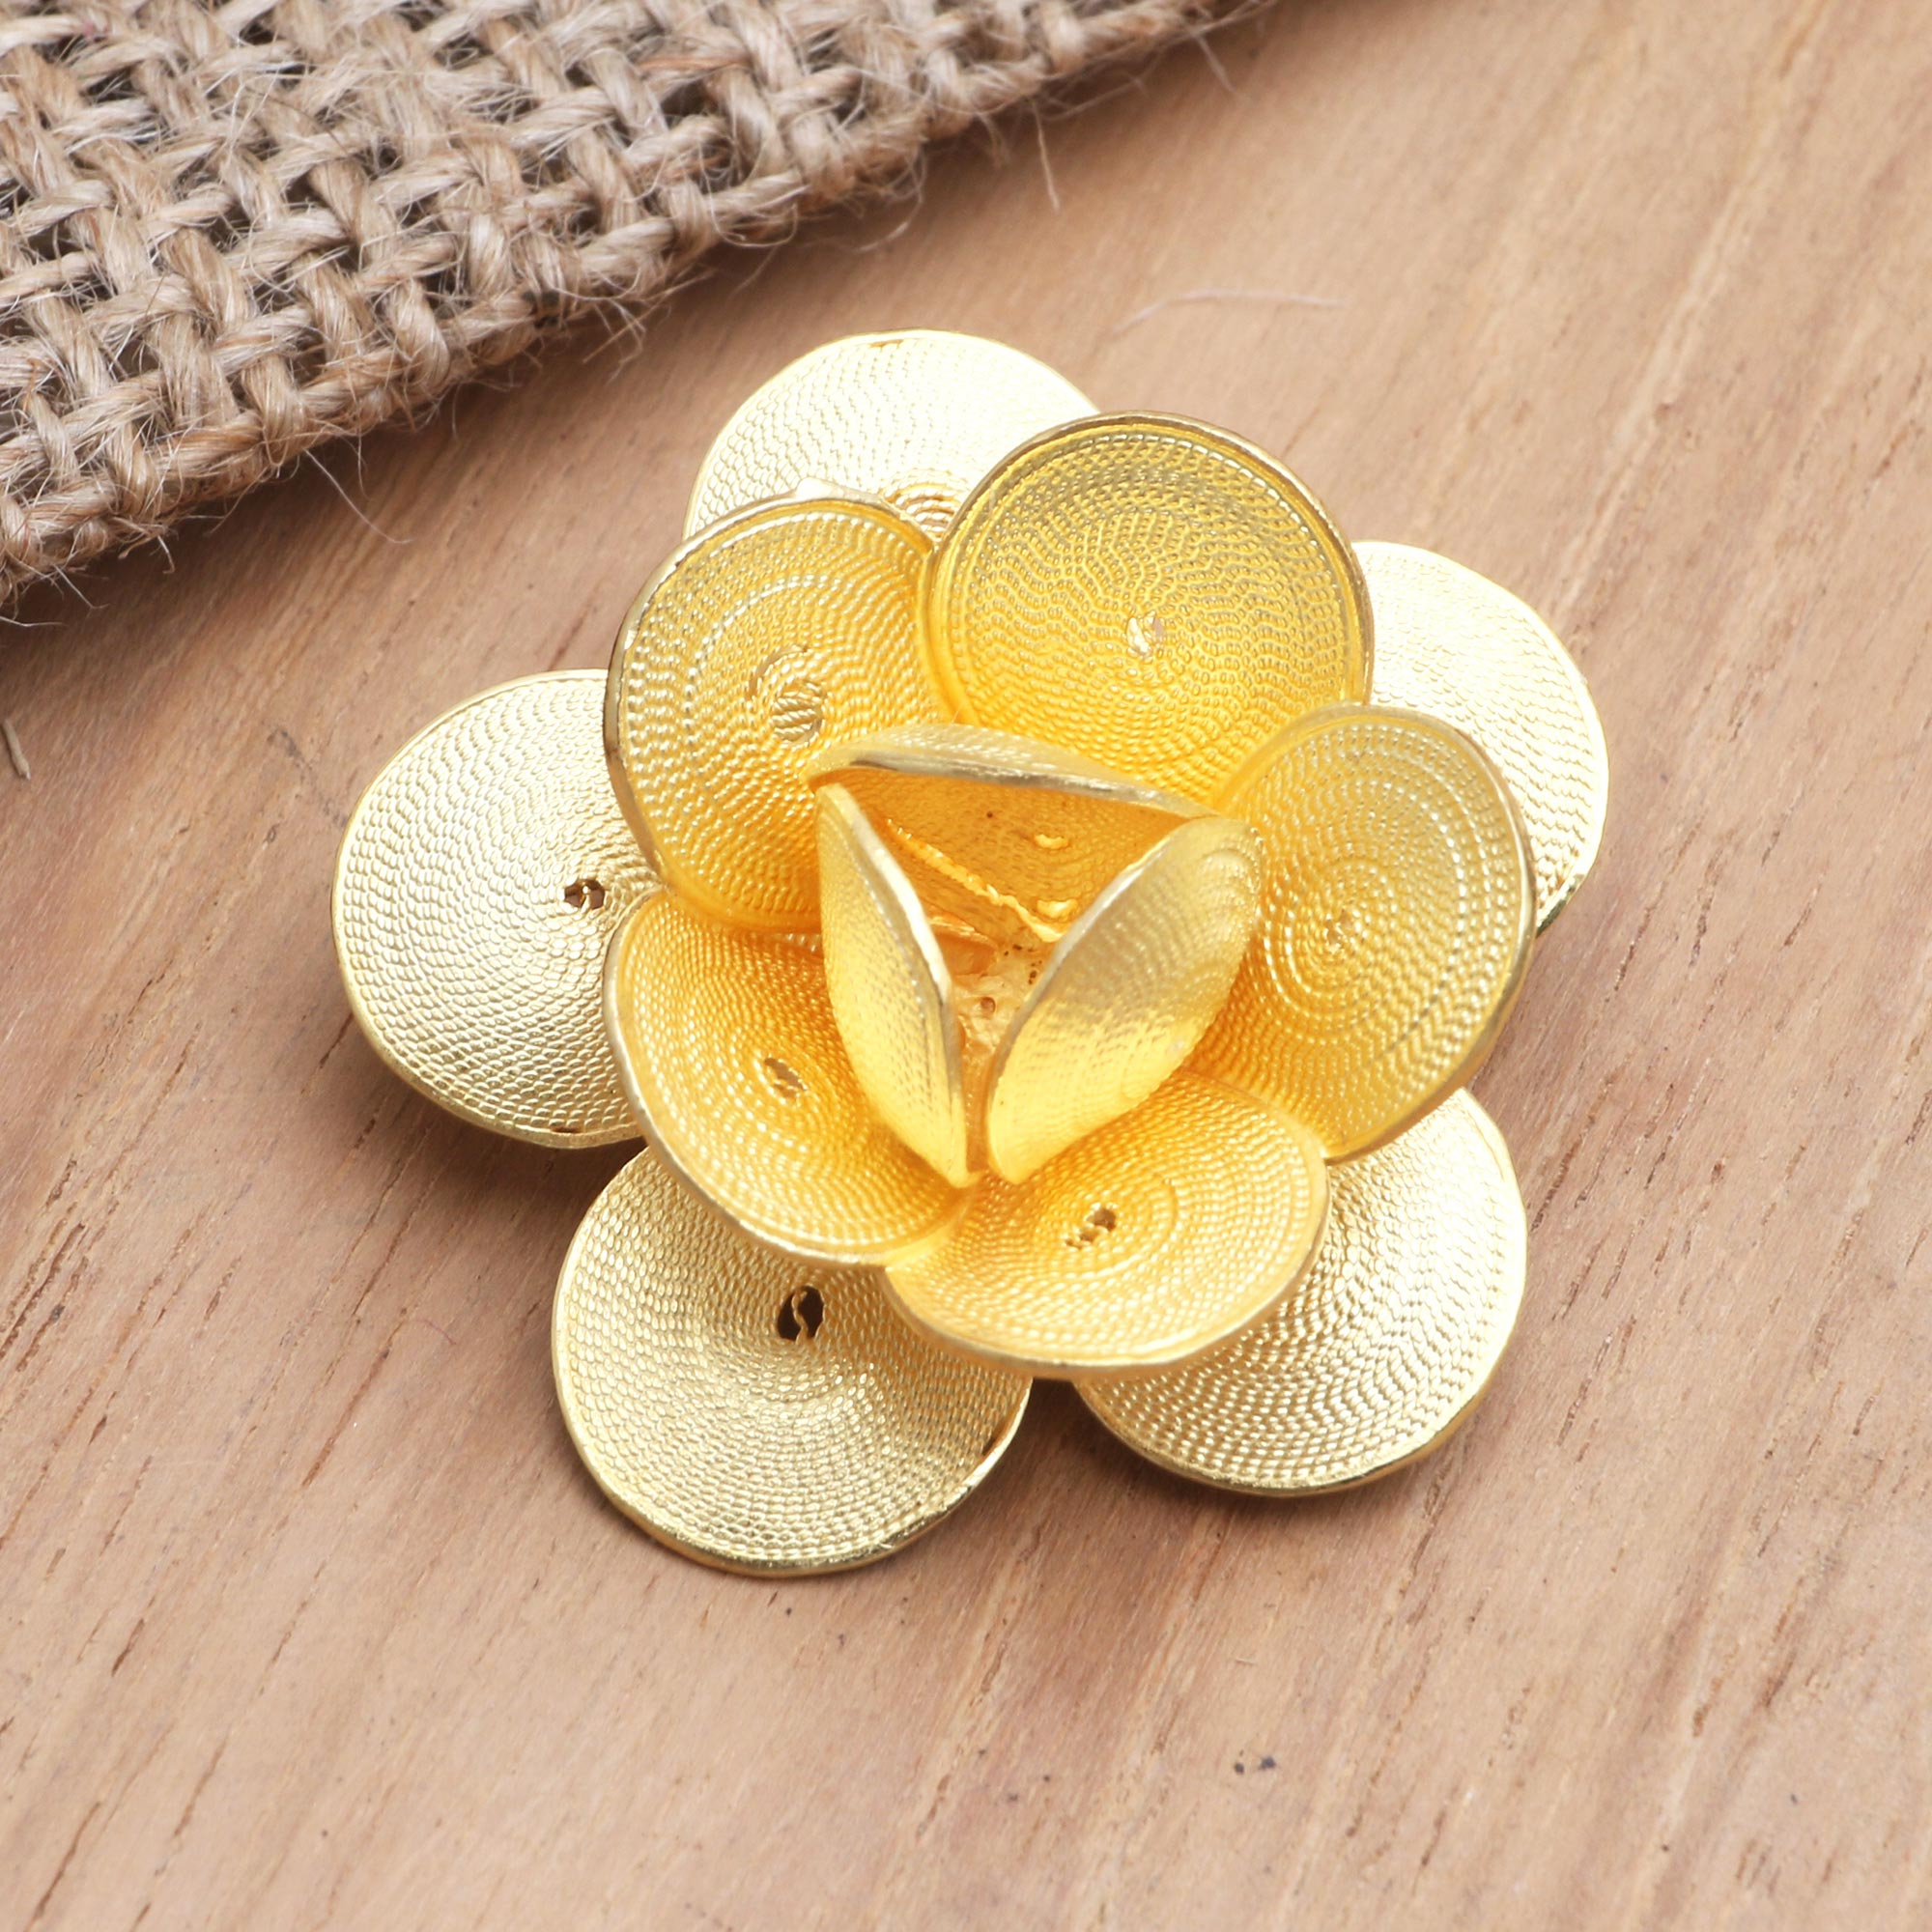 Handcrafted Rose Brooch Pins - Unique and Delicate Floral Jewelry for Women  - Perfect Holiday Gift